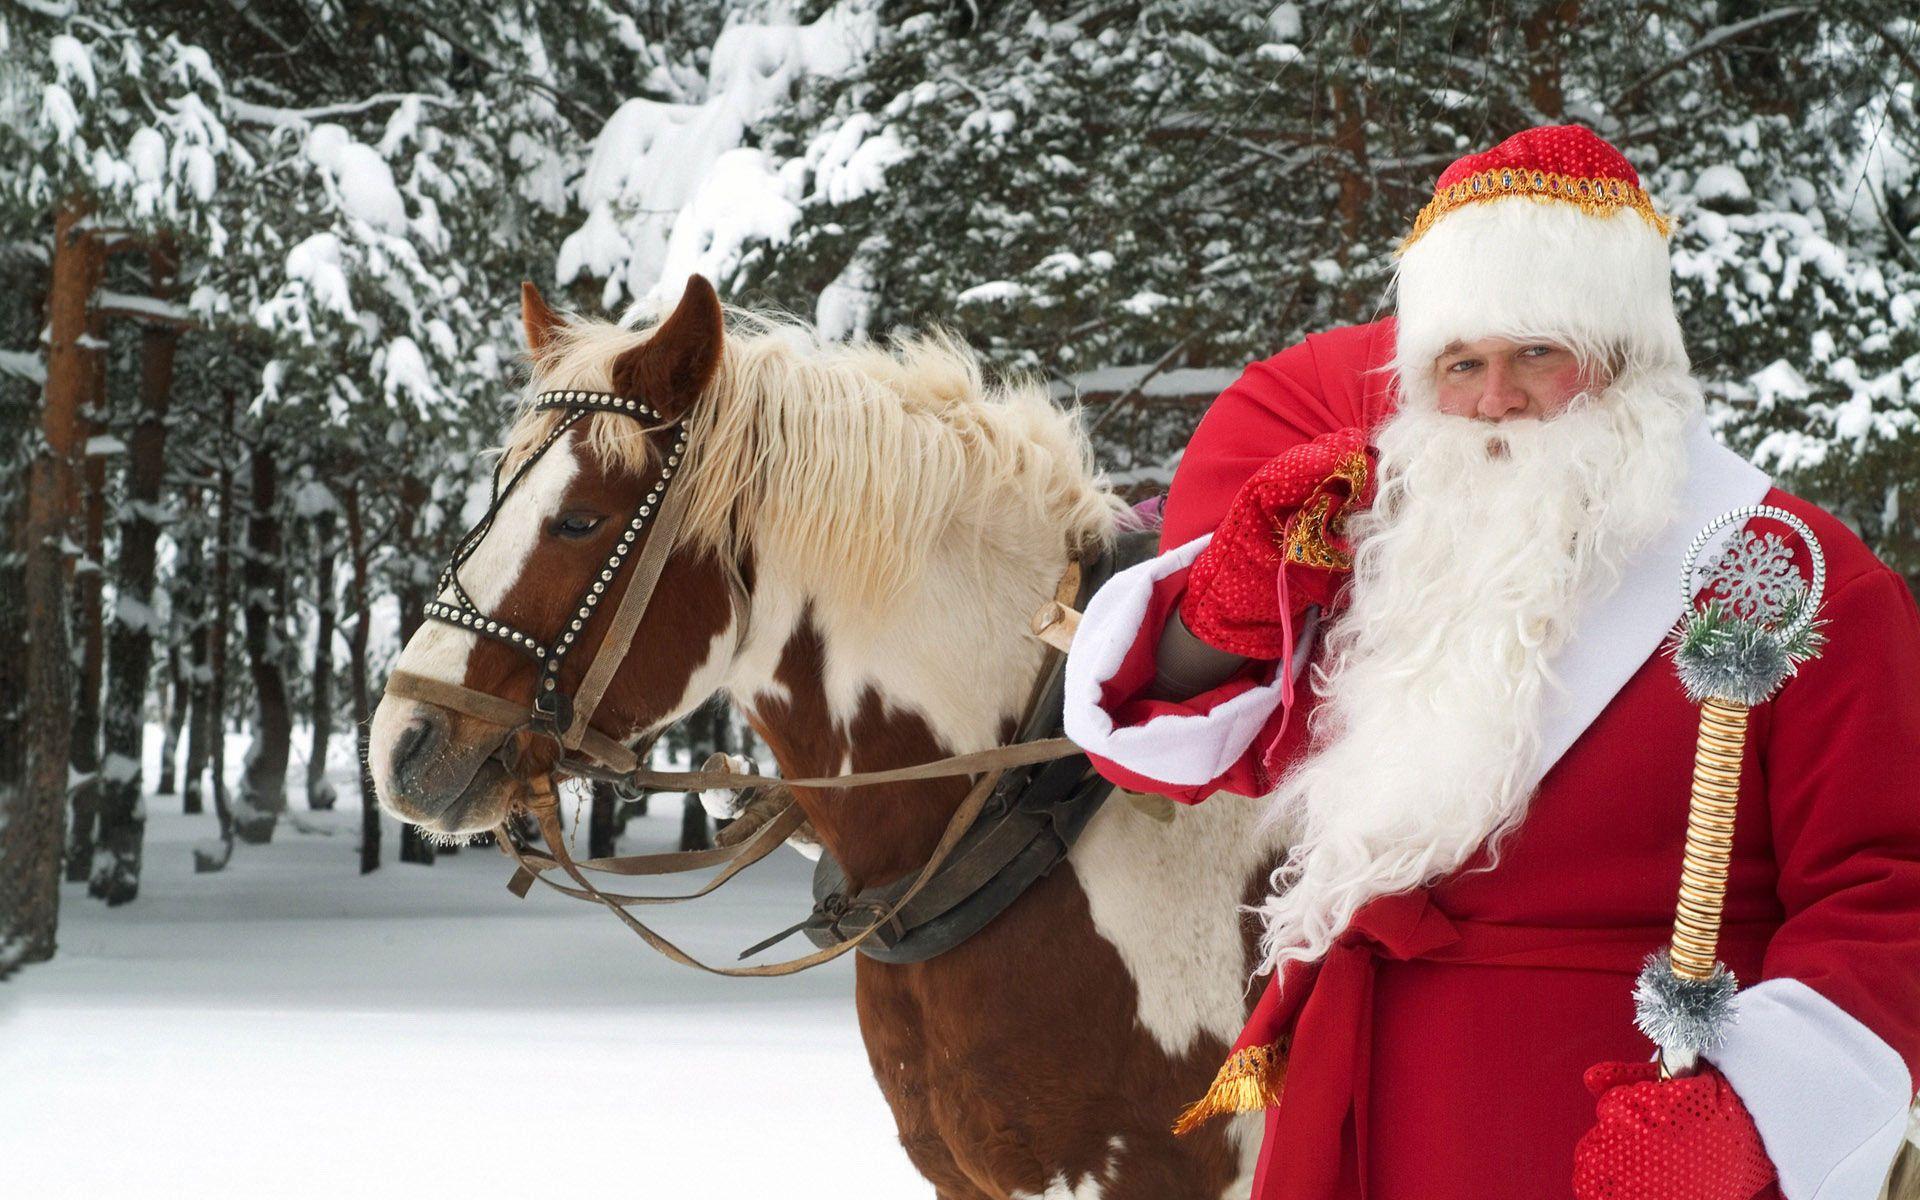 Download the Santa and Clydesdale Wallpaper, Santa and Clydesdale